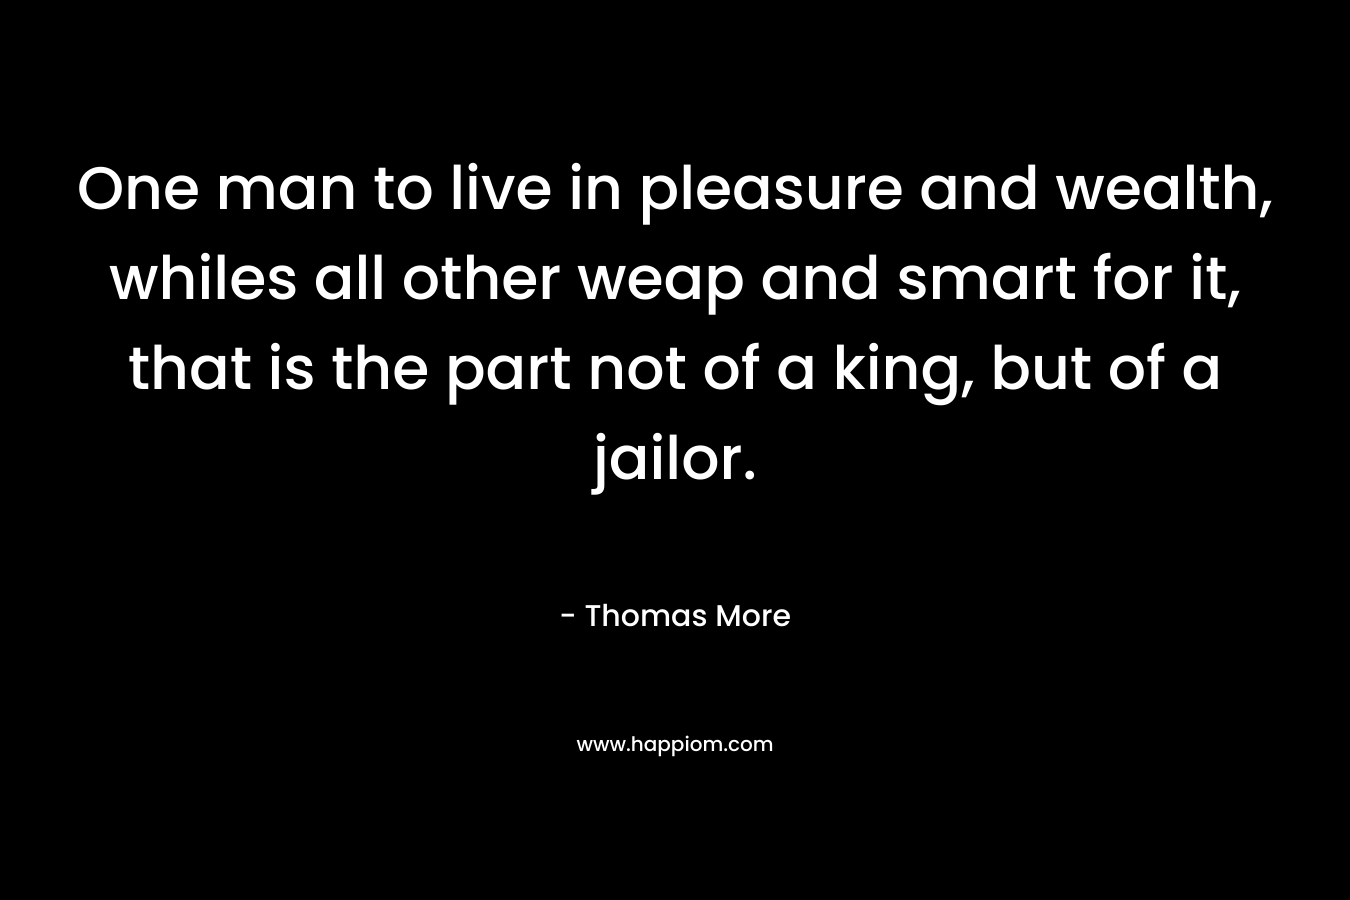 One man to live in pleasure and wealth, whiles all other weap and smart for it, that is the part not of a king, but of a jailor. – Thomas More